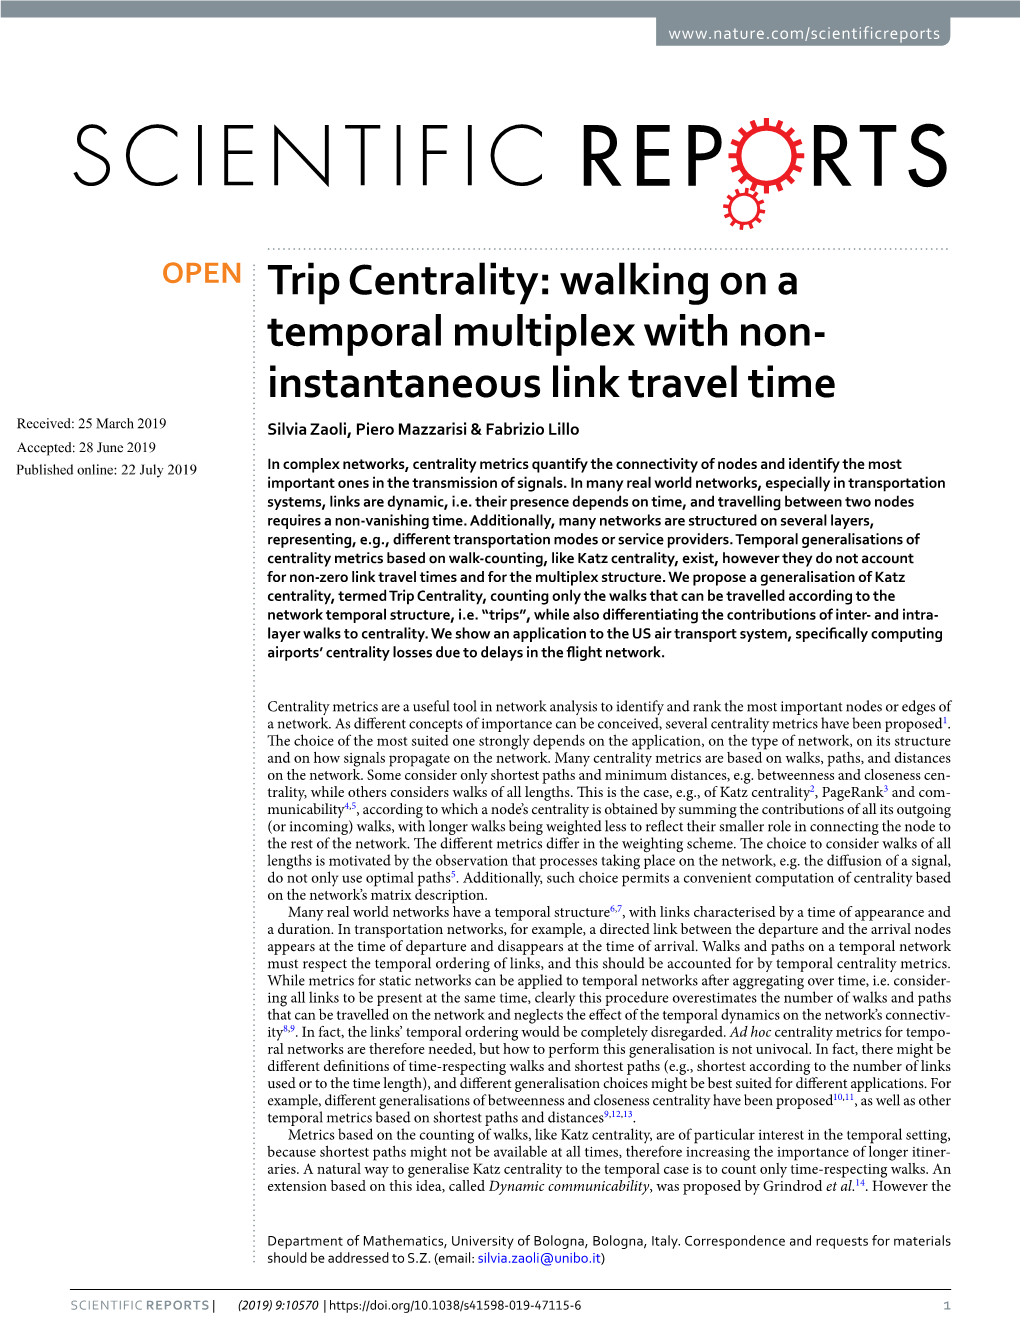 Trip Centrality: Walking on a Temporal Multiplex with Non-Instantaneous